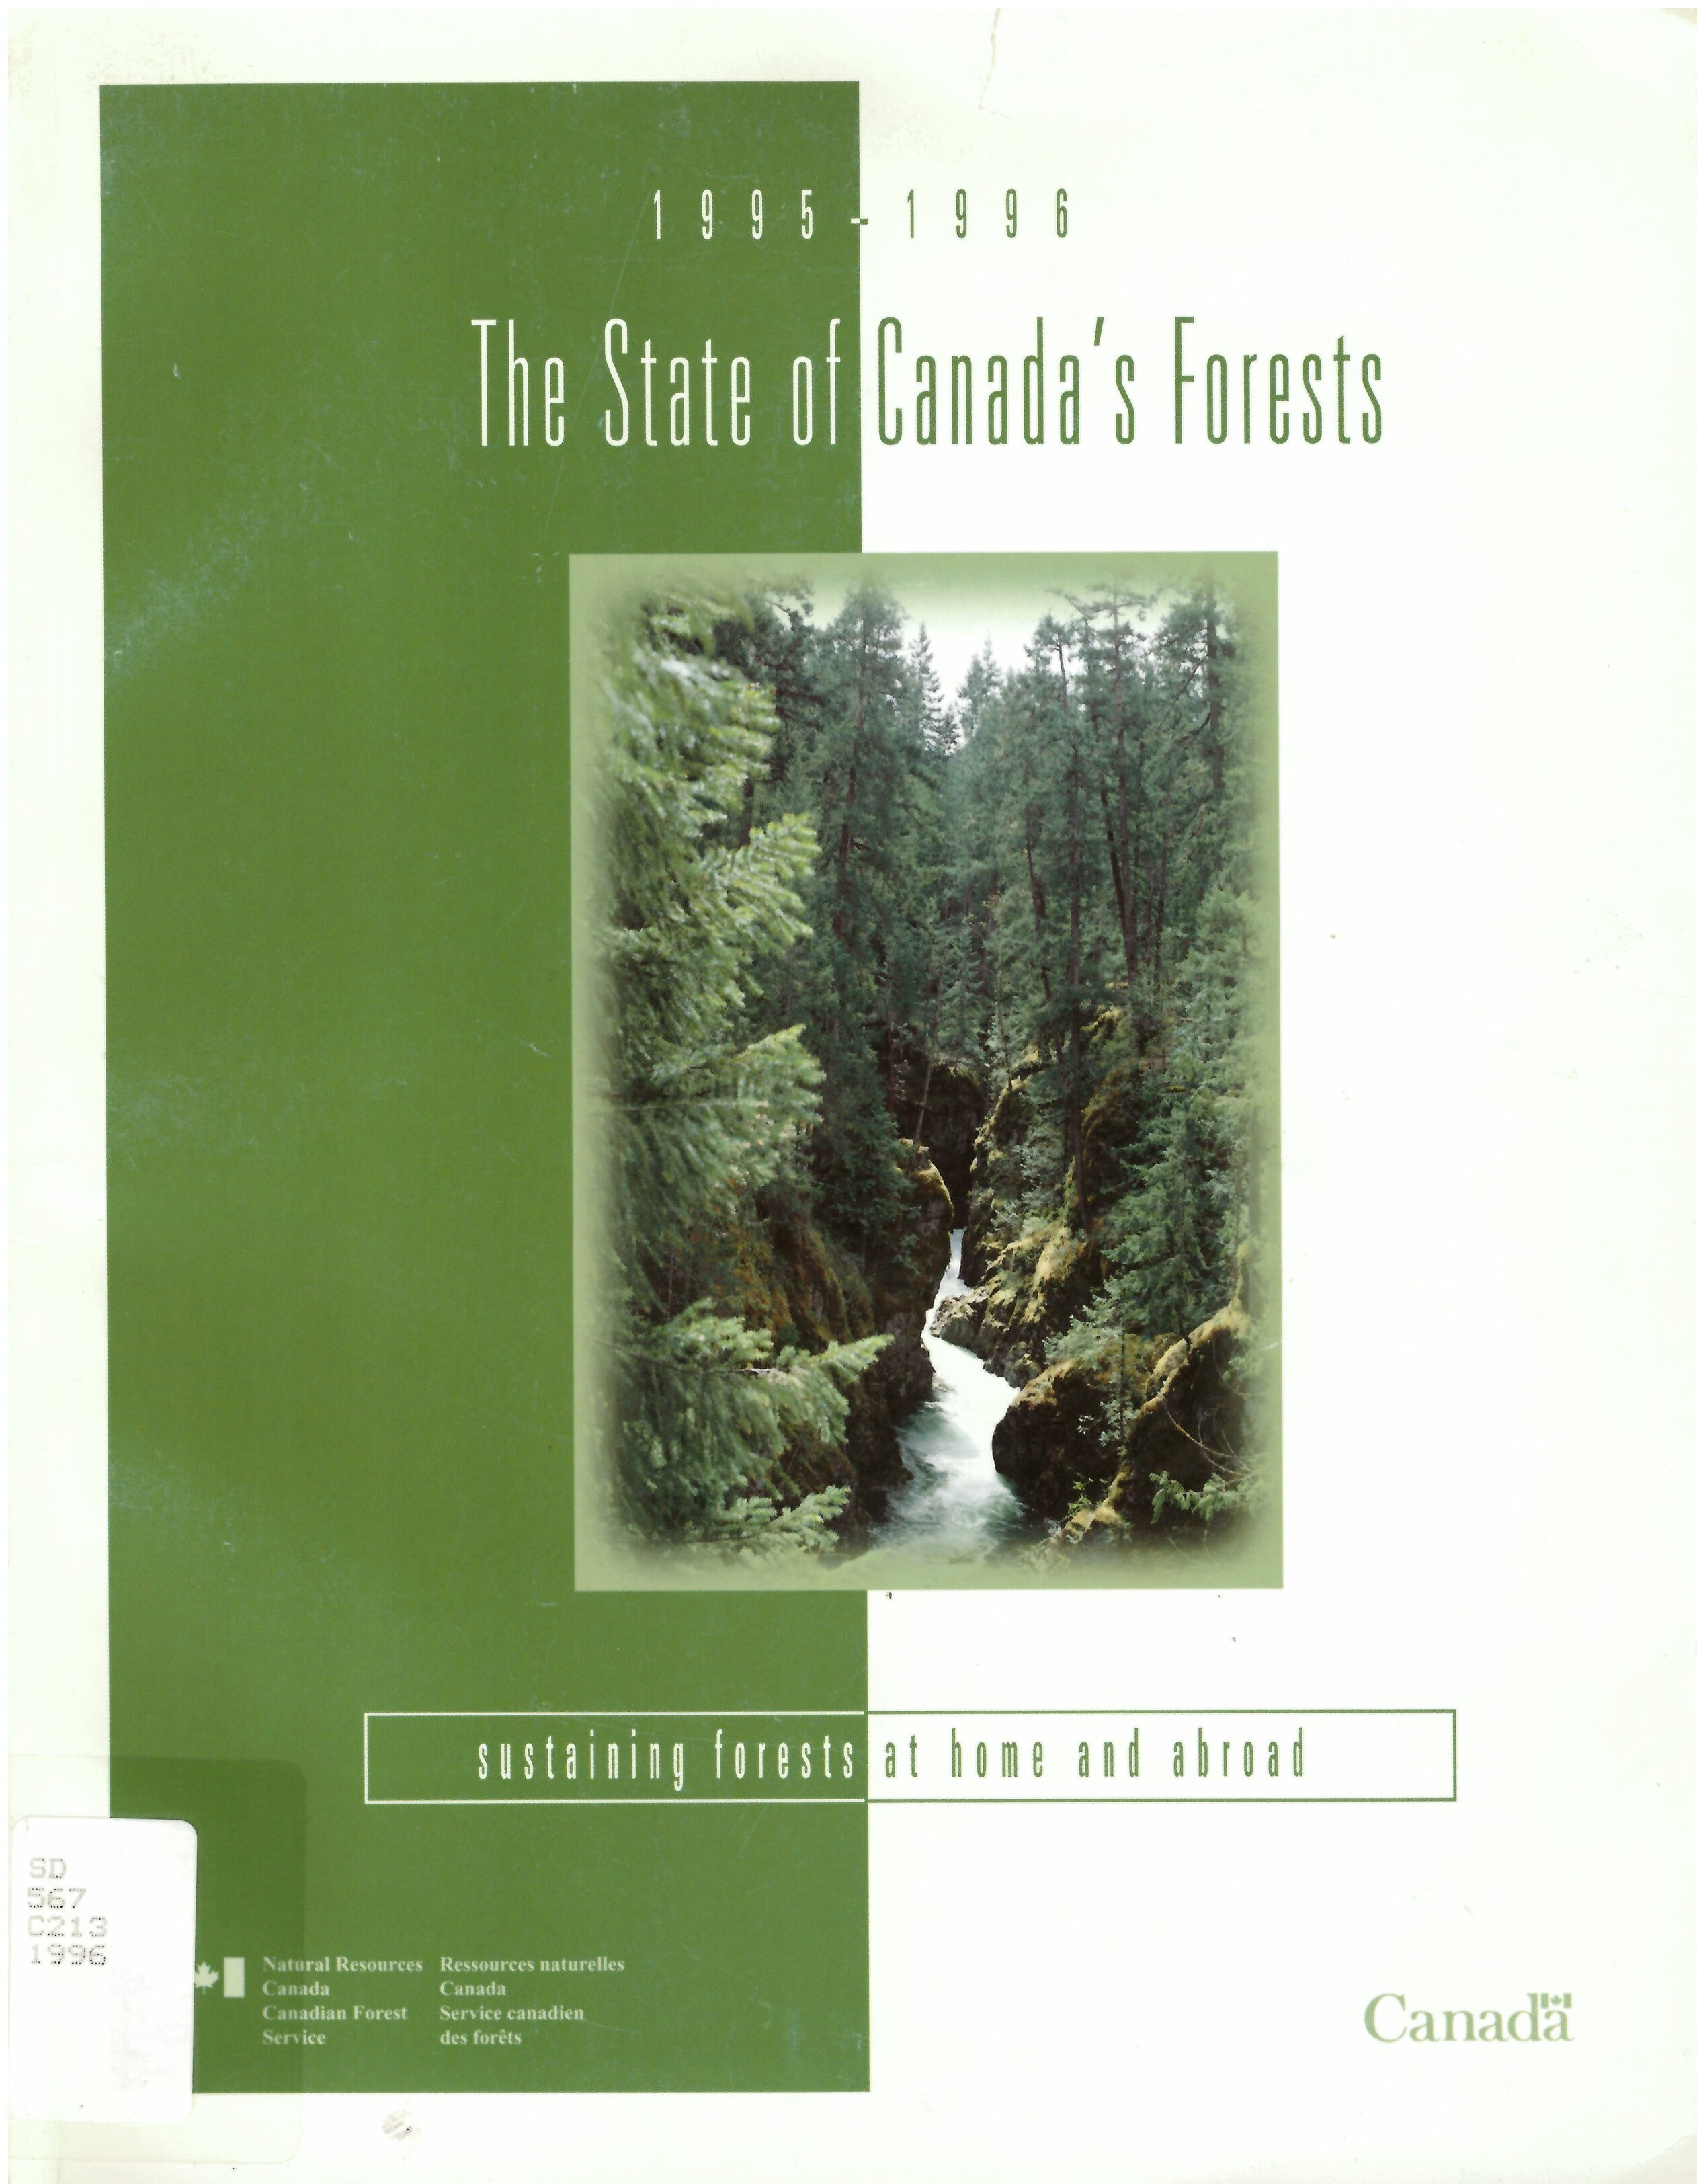 The state of Canada's forests